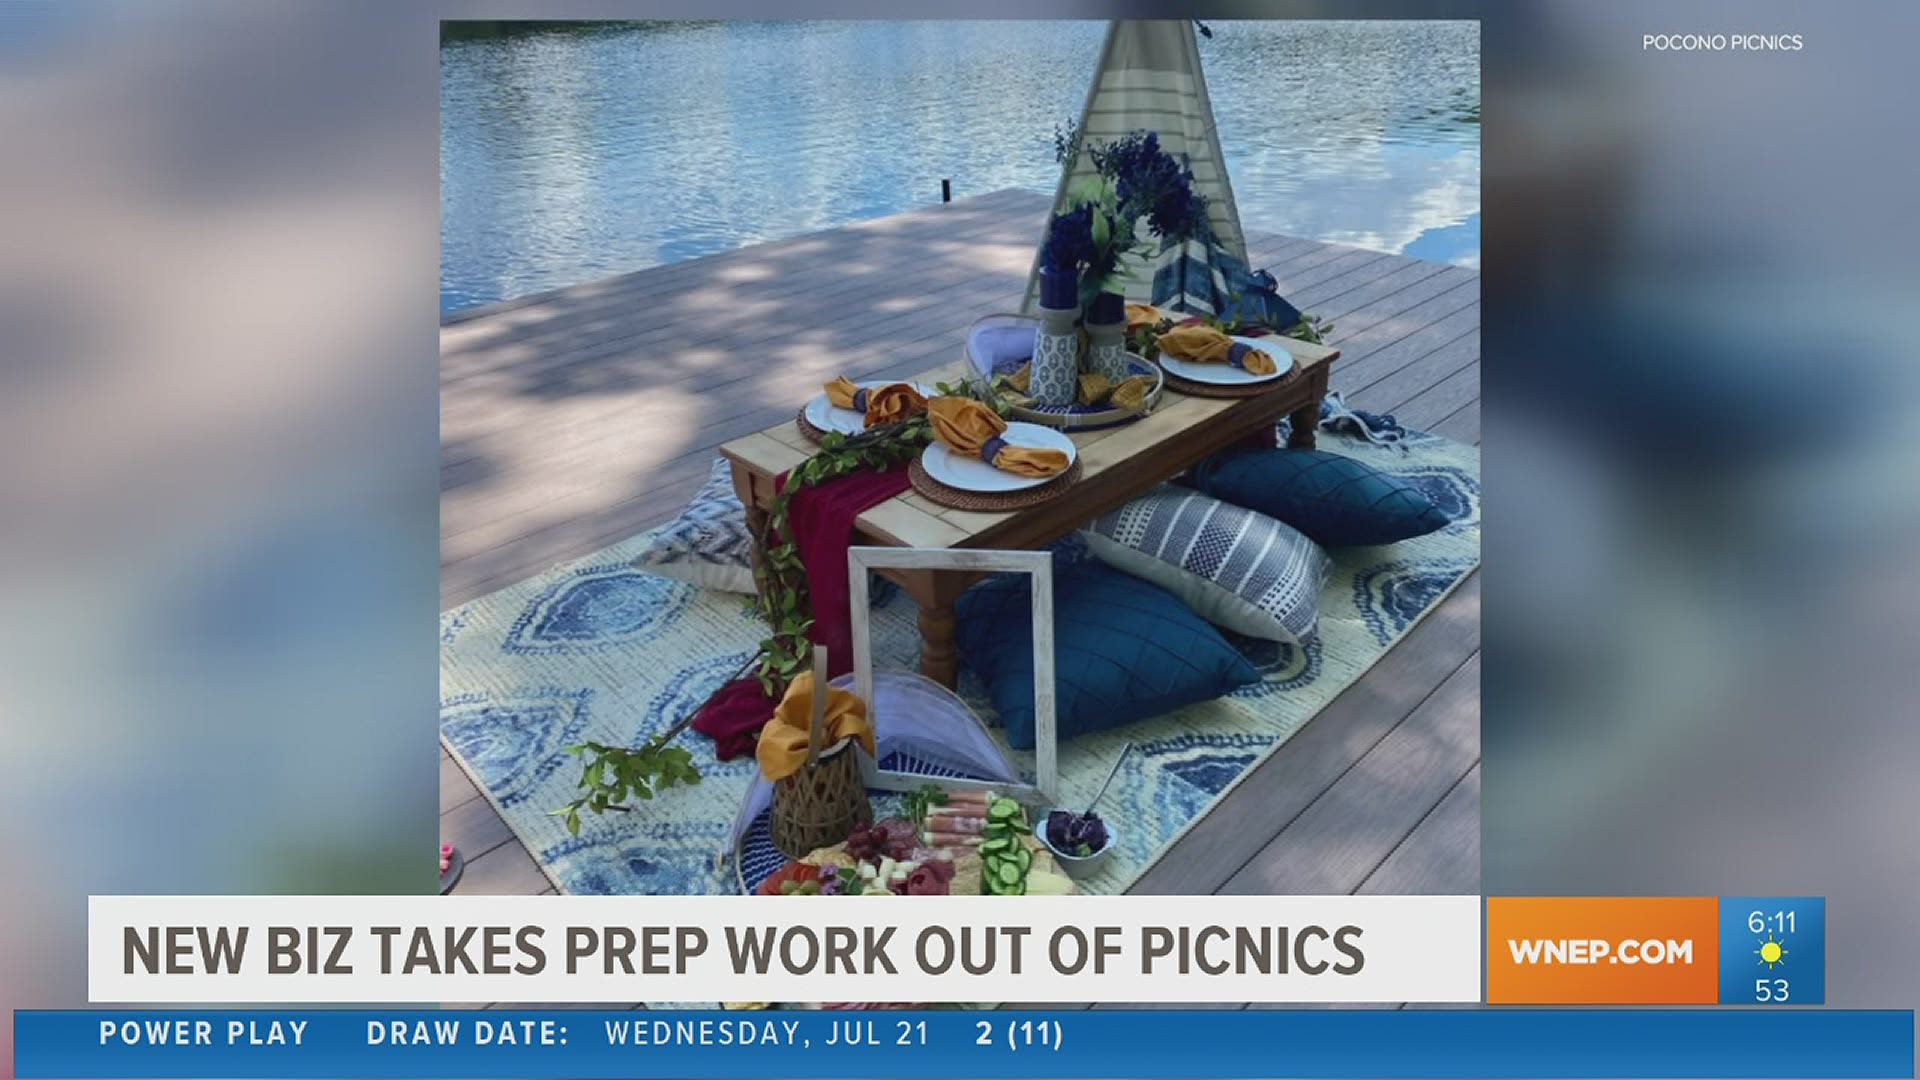 Our area has so many amazing places for picnics. And, if you're a fan of that fun, but not the work, Pocono Picnic might be able to help!